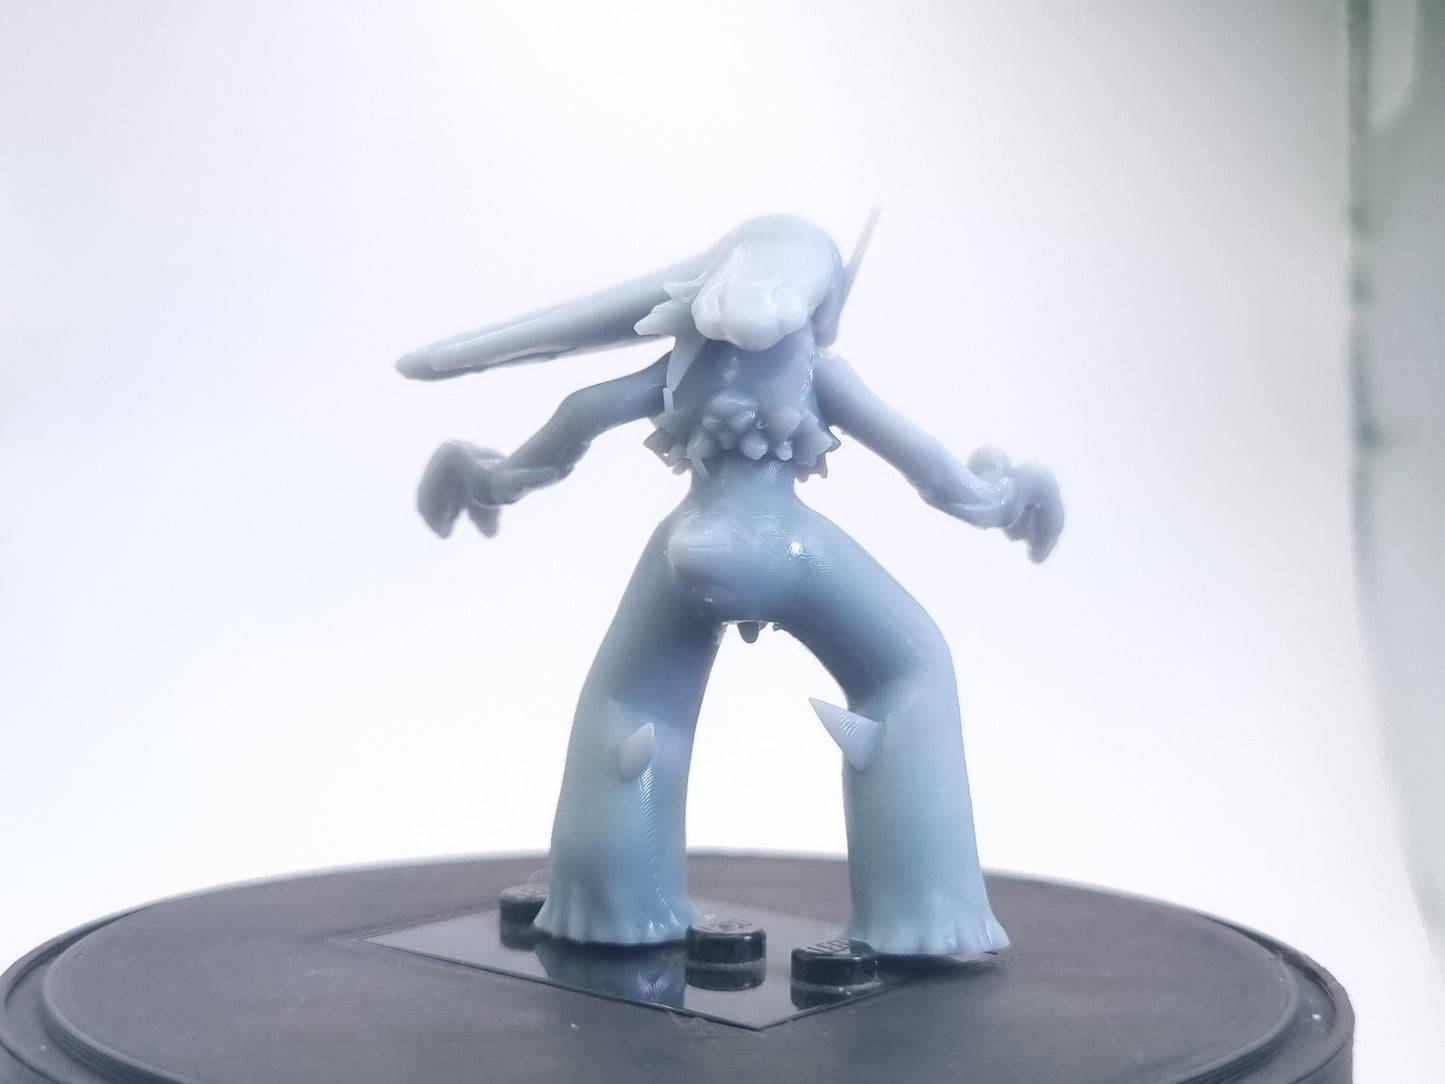 Building toy custom 3D printed fighter figure